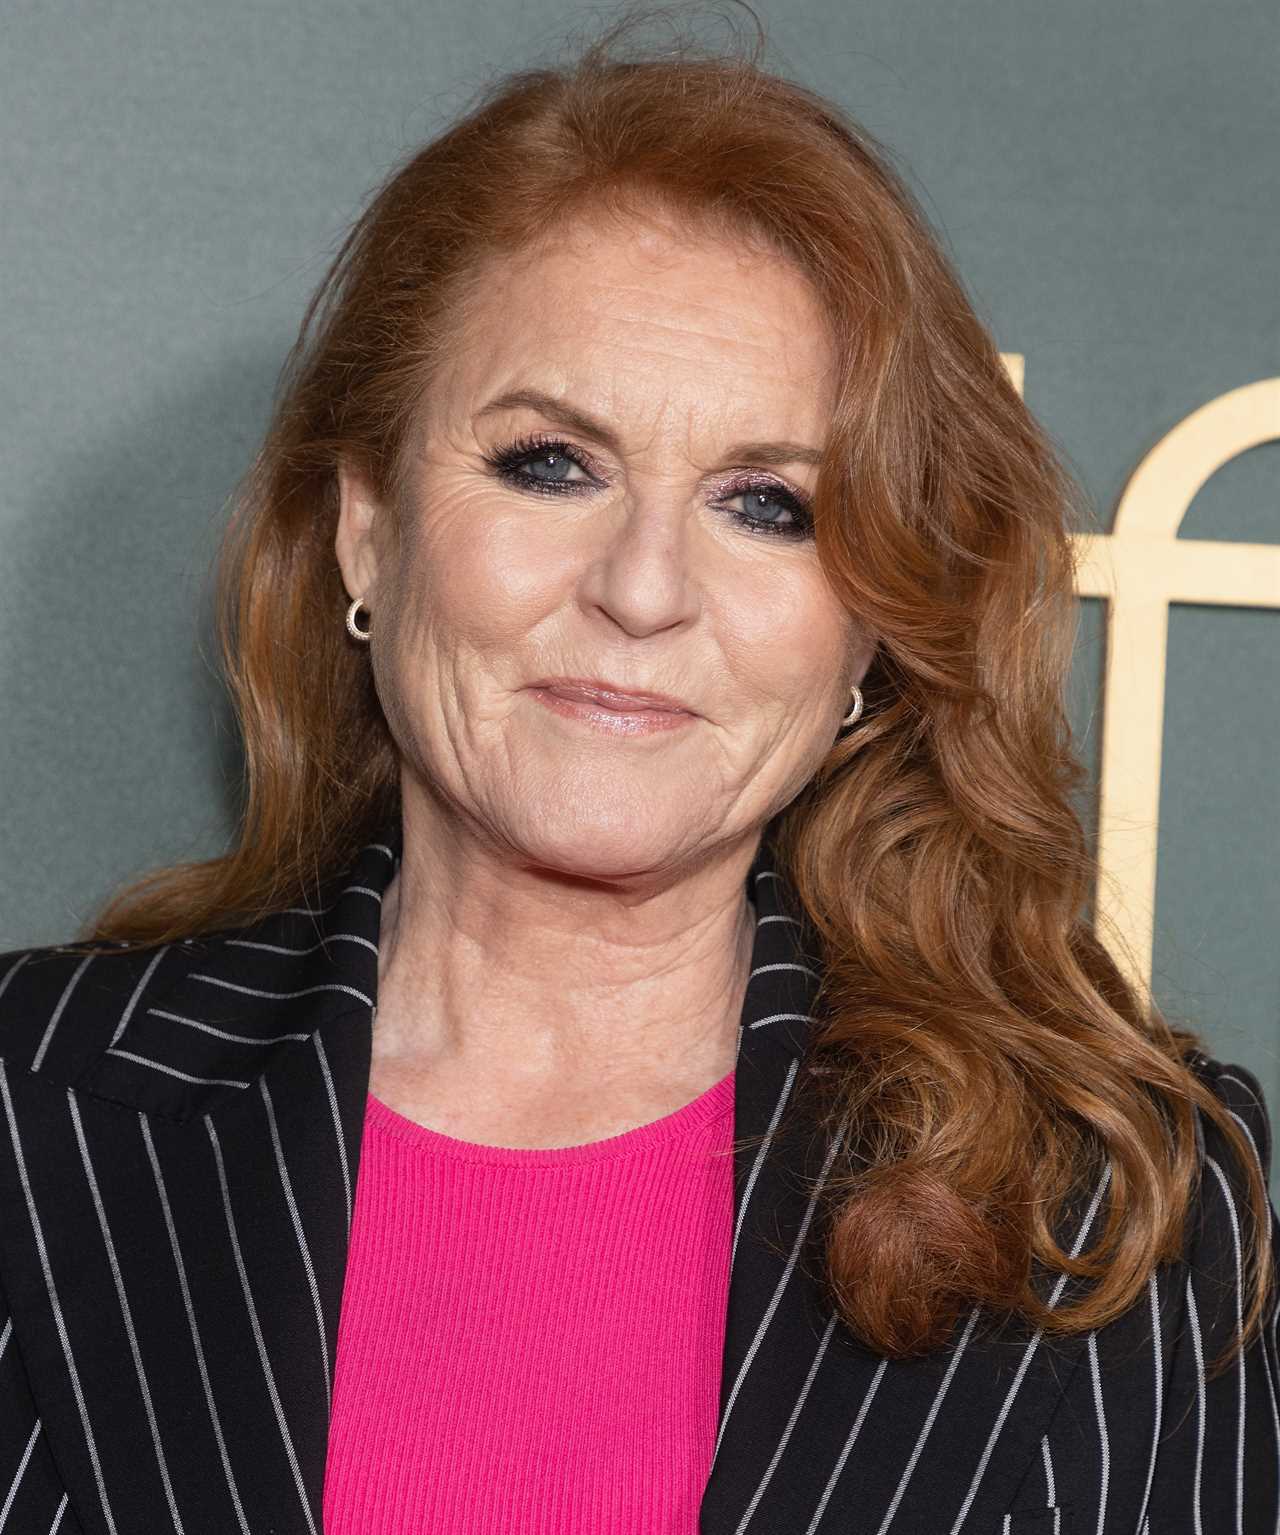 Sarah Ferguson: Divorce from Prince Andrew and Life After